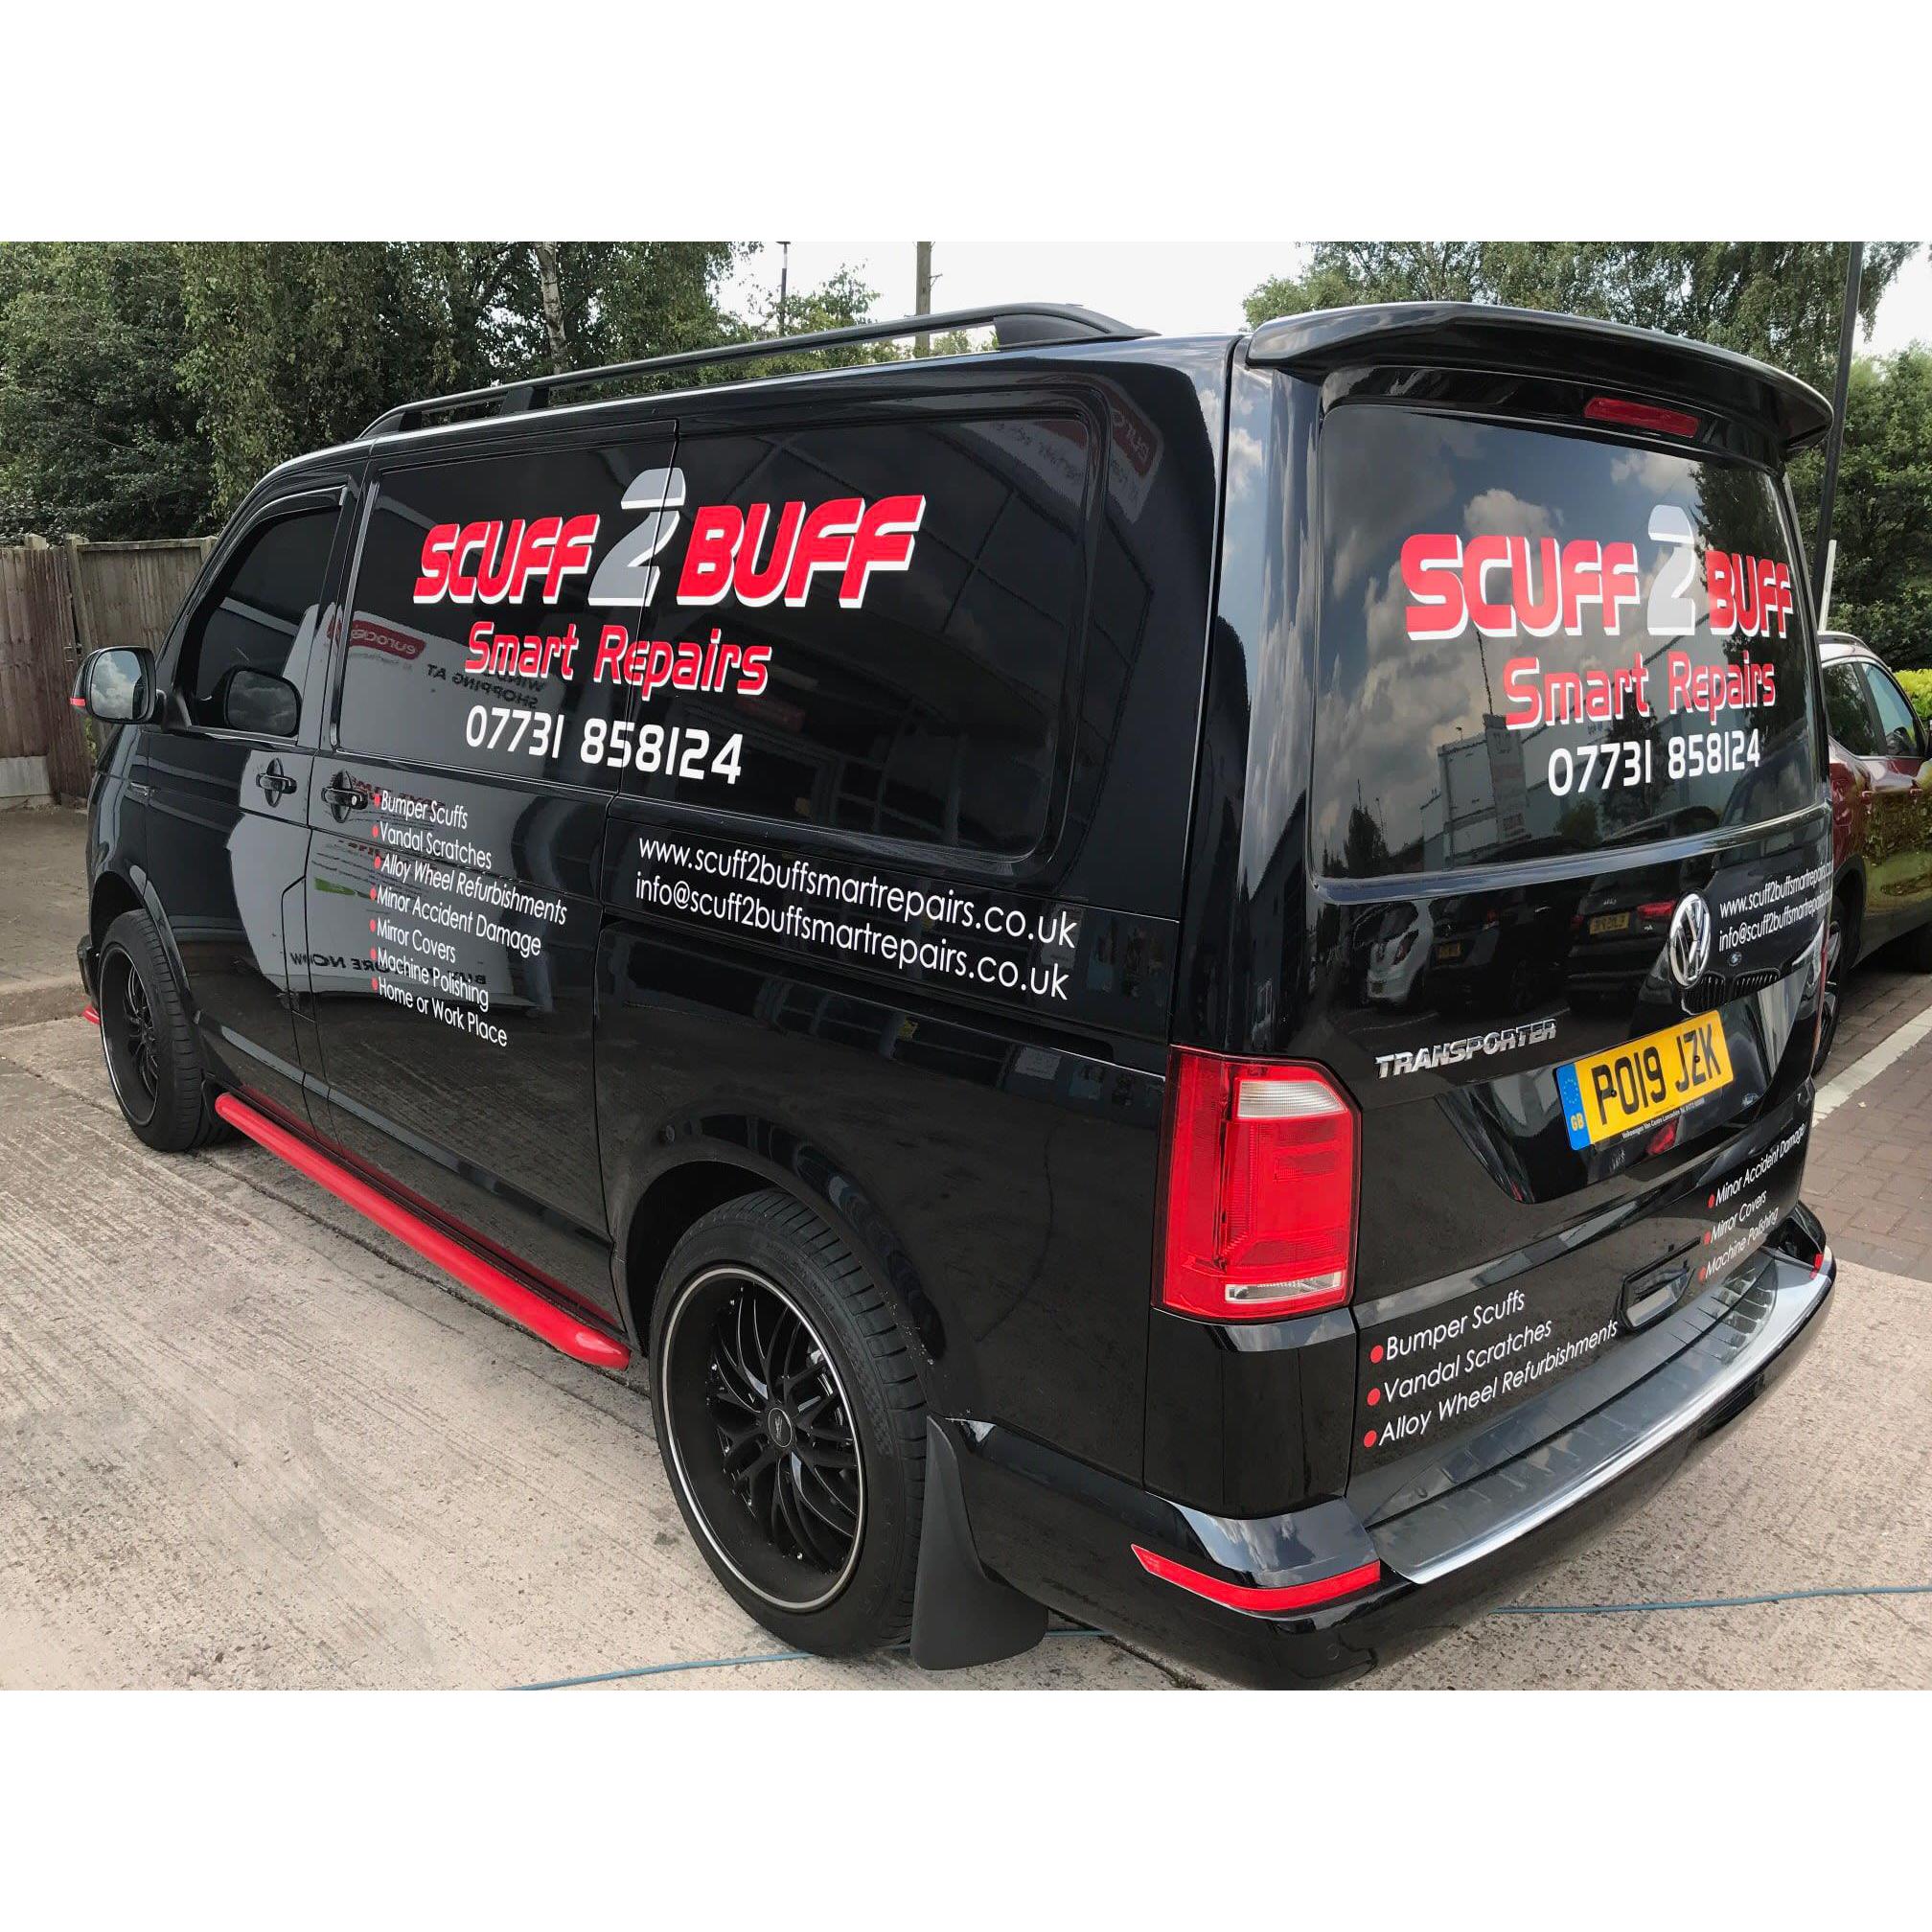 Scuff2Buff Smart Repairs - Walsall, West Midlands WS3 5DY - 07731 858124 | ShowMeLocal.com